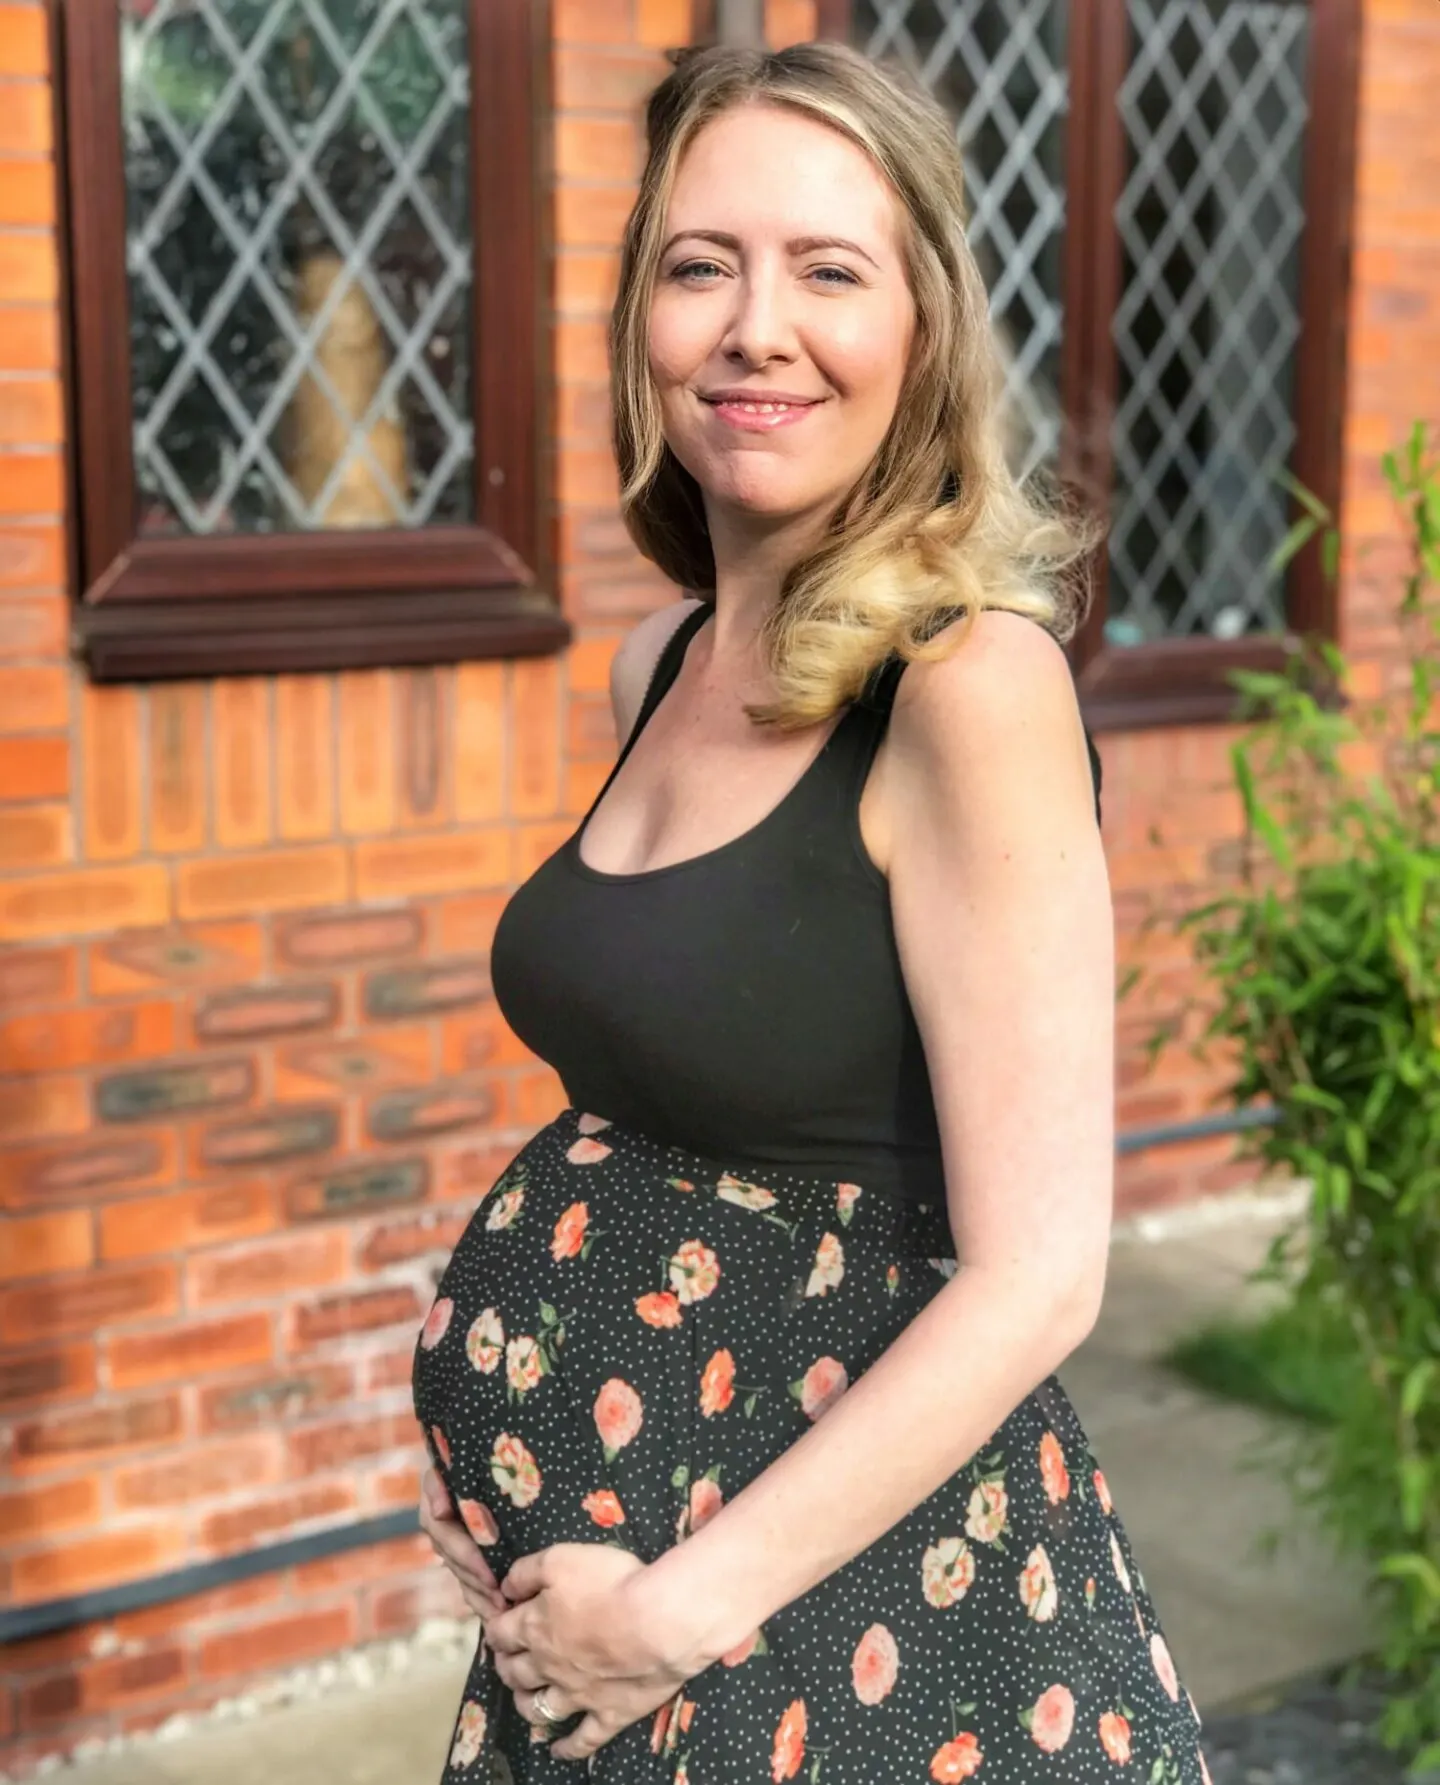 Mummy to Dex, baby led weaning mummy blogger aka Nicola stood in front of her home wearing a black vest top and skirt, six months pregnant